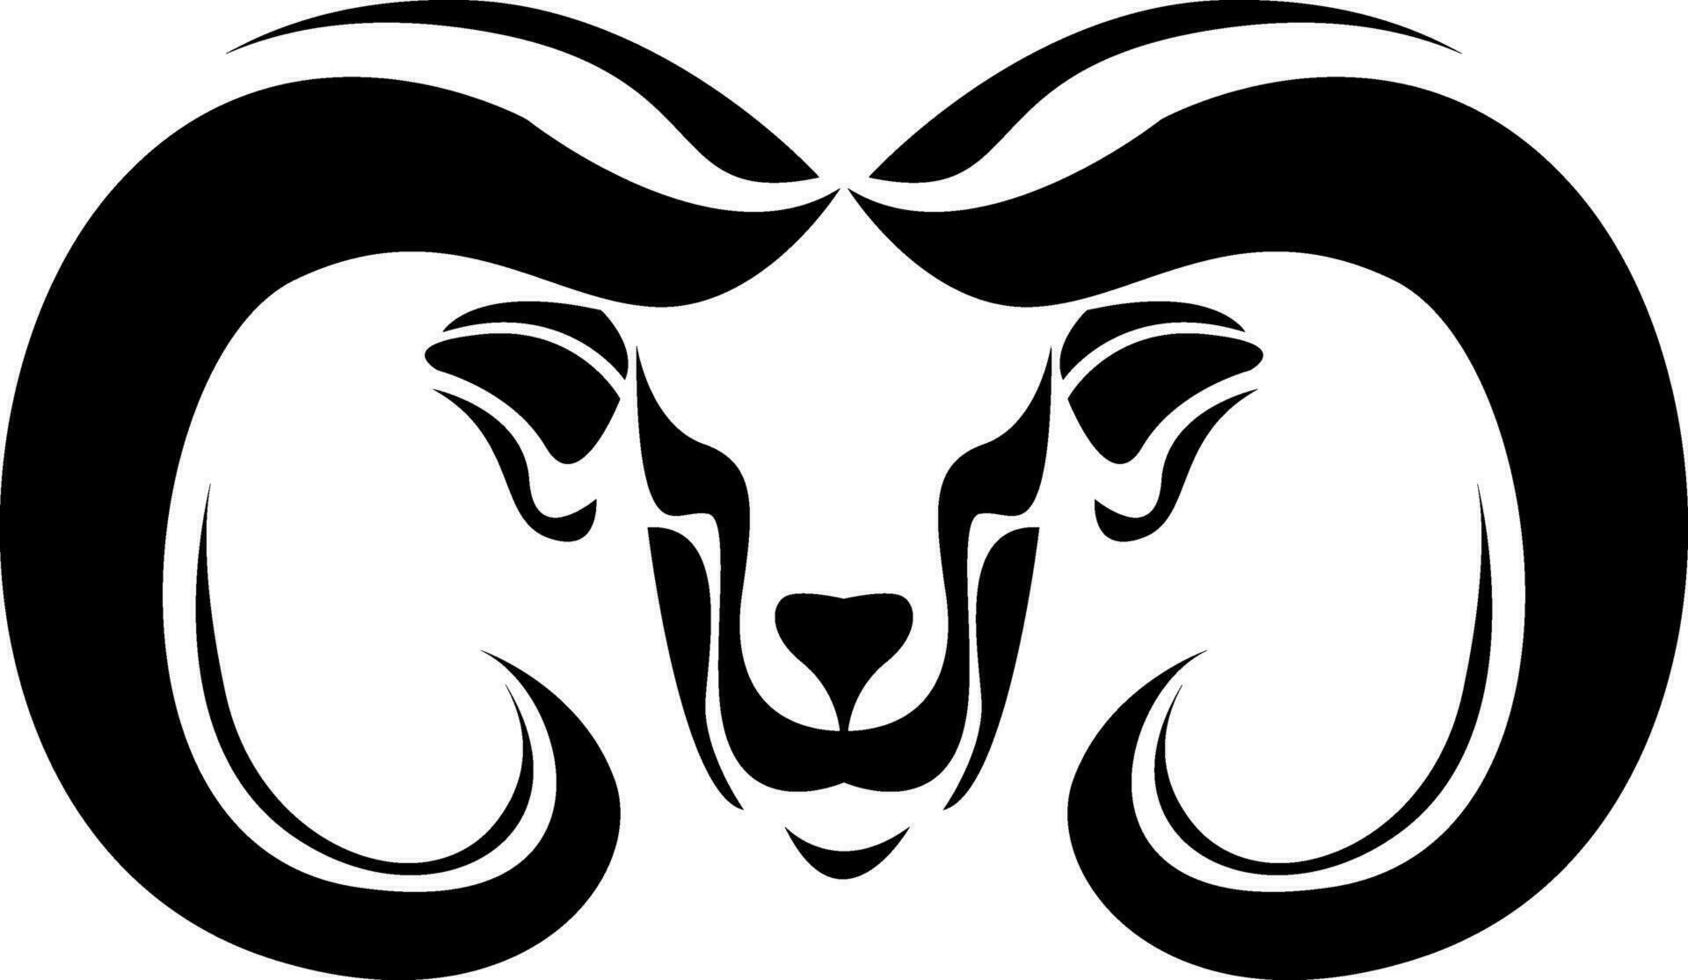 Ram face tattoo, tattoo illustration, vector on a white background.